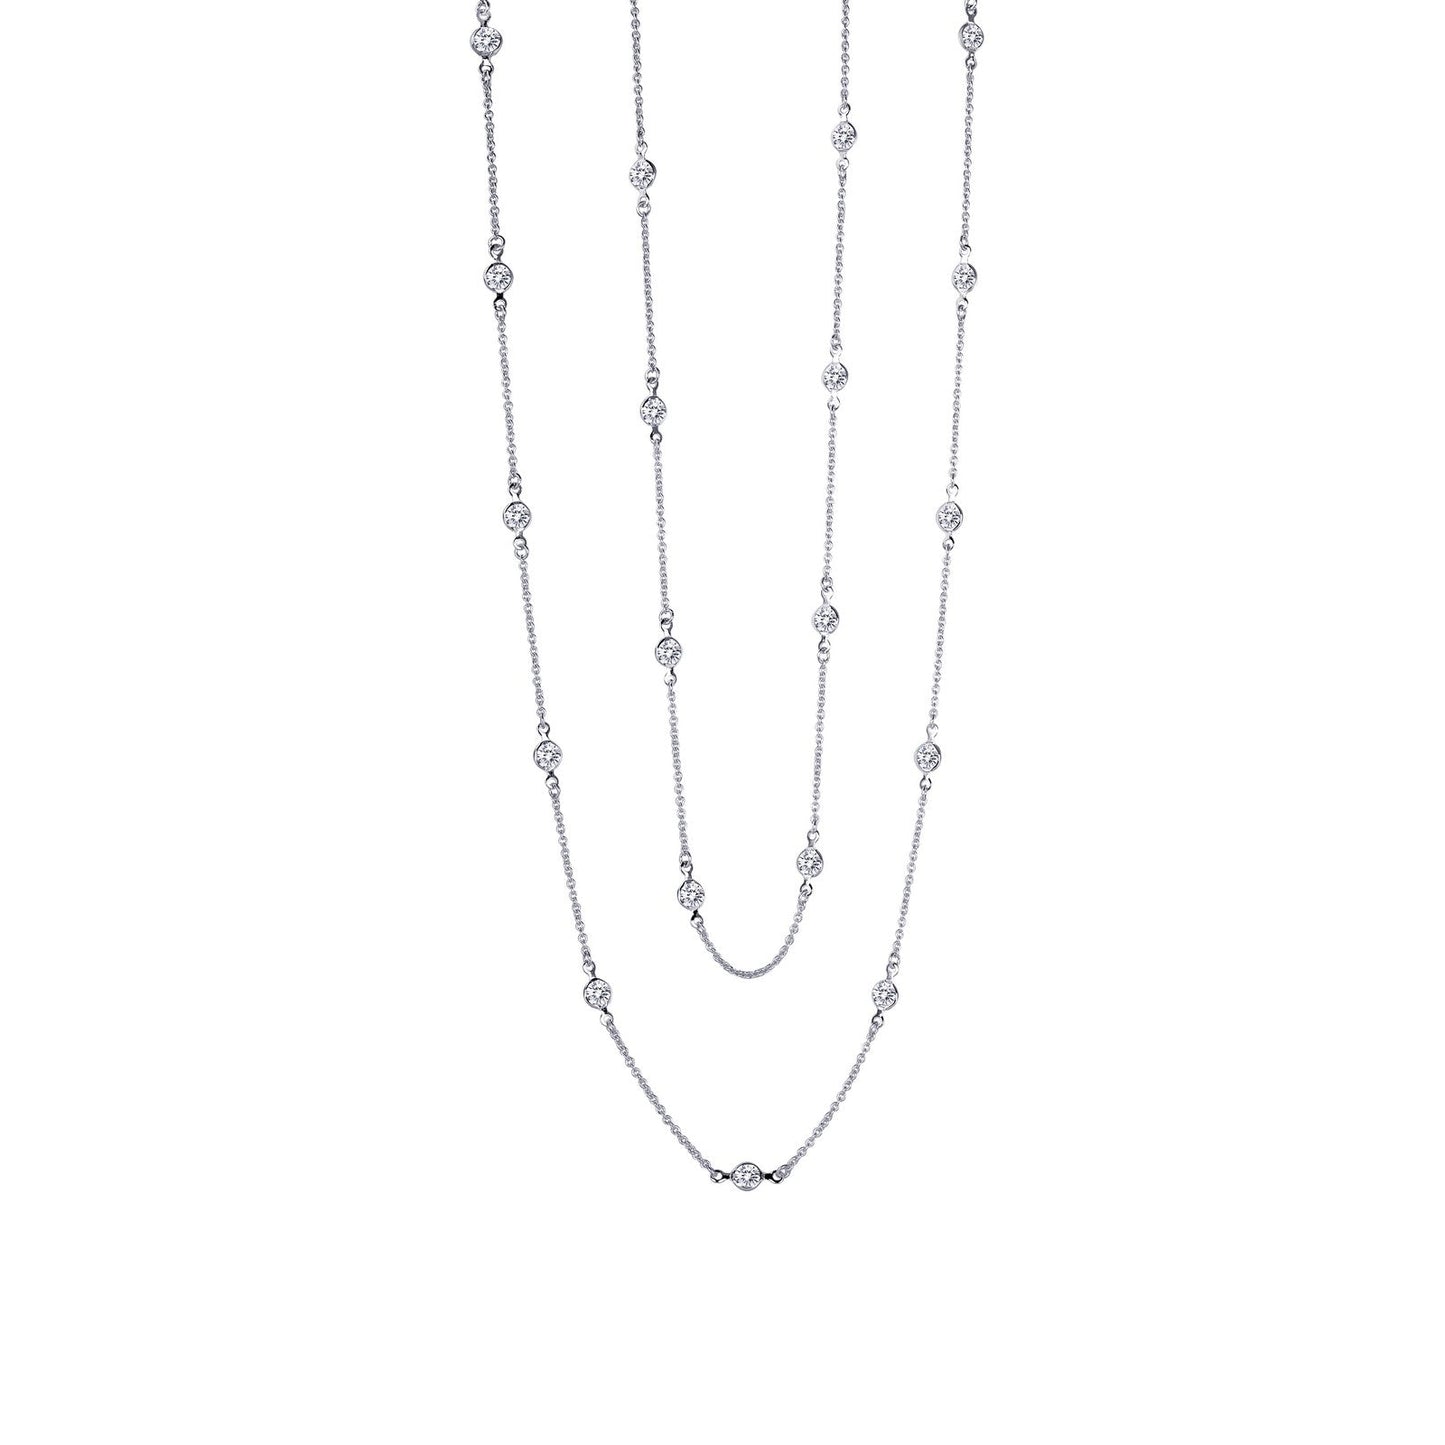 Lafonn Classic Station Necklace 32 Stone Count N0016CLP48